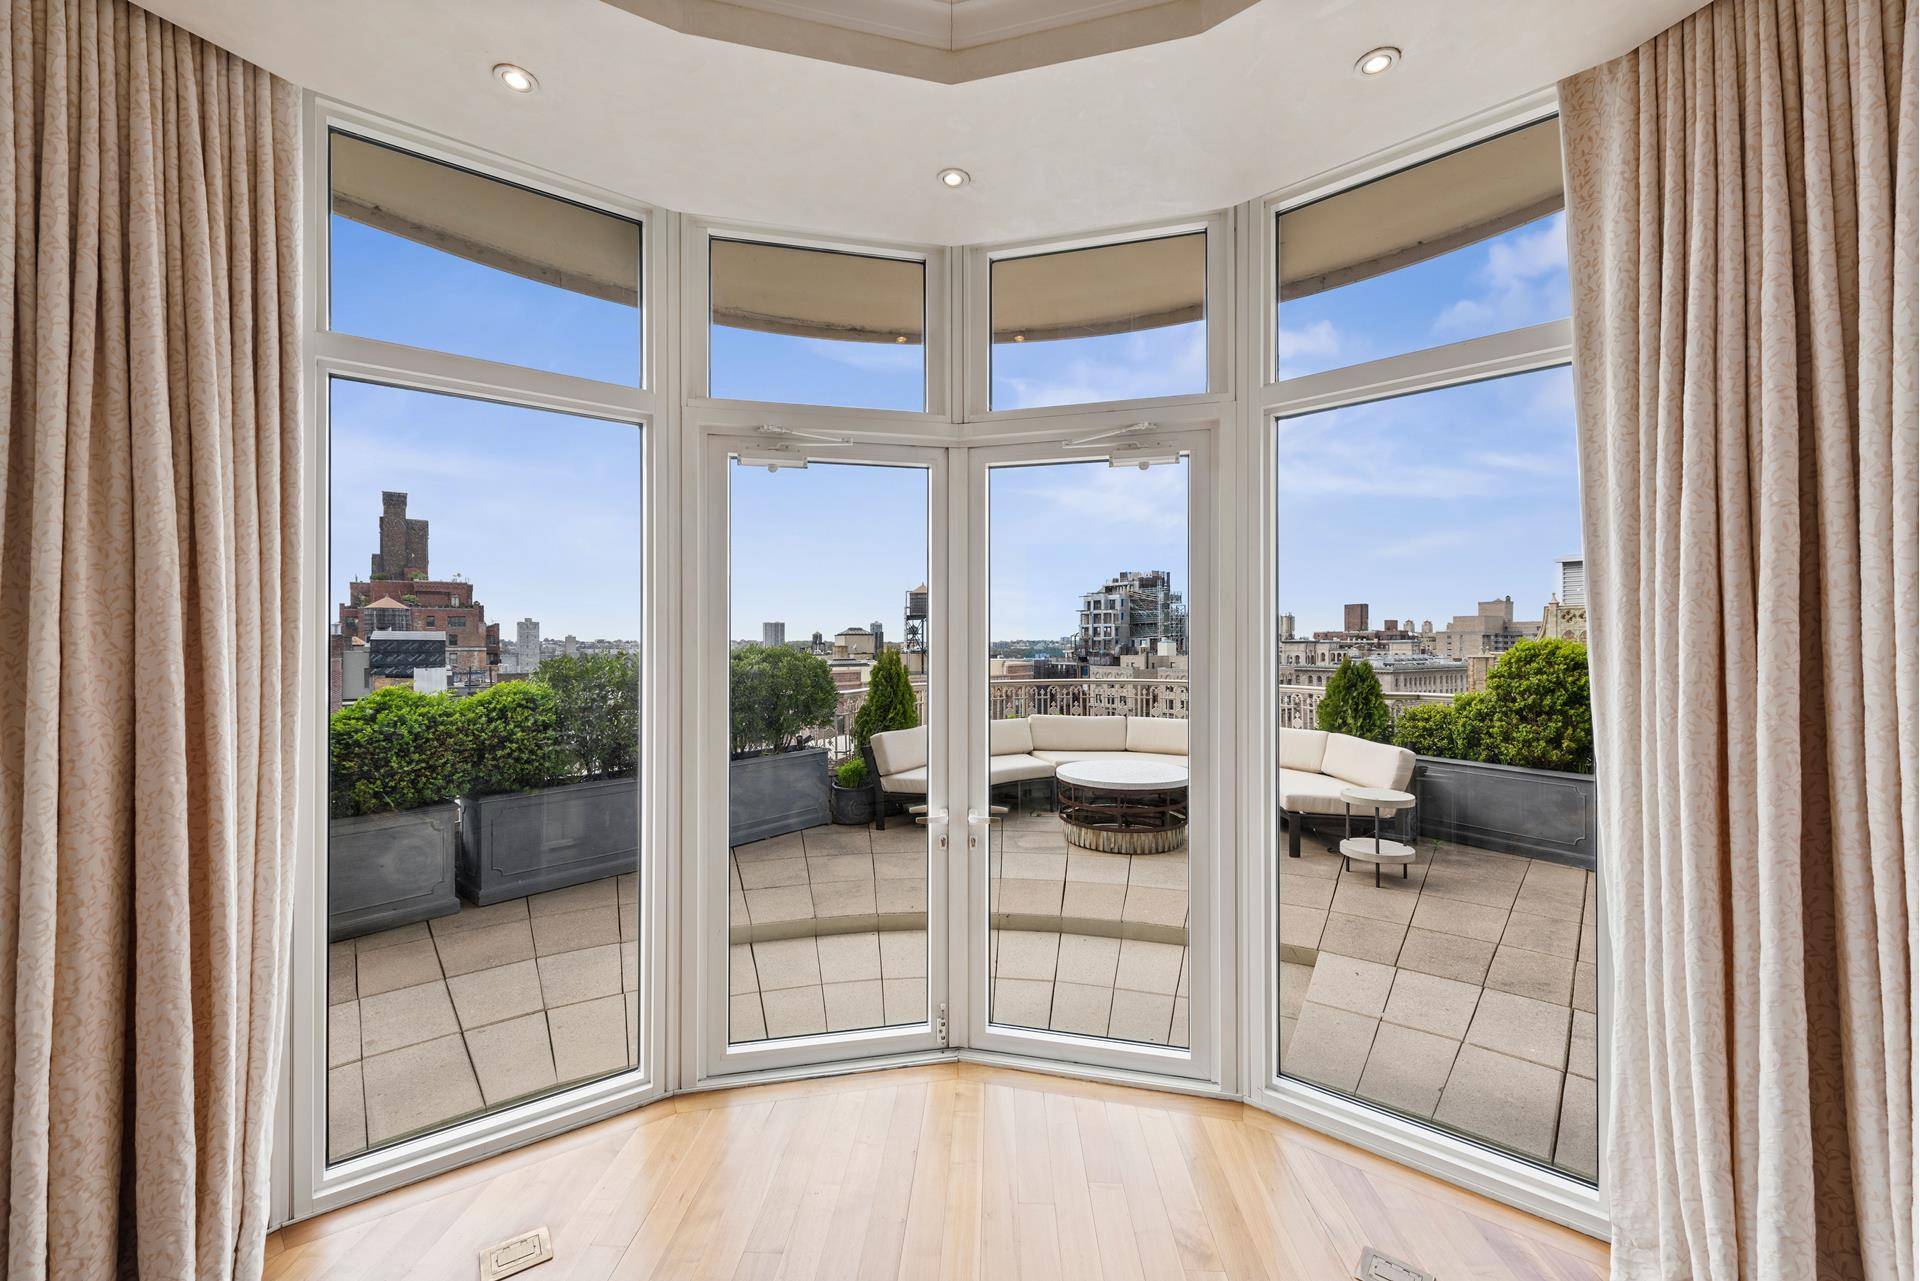 Penthouse perfection awaits at The Laureate with one of the most enviable outdoor spaces in the neighborhood !